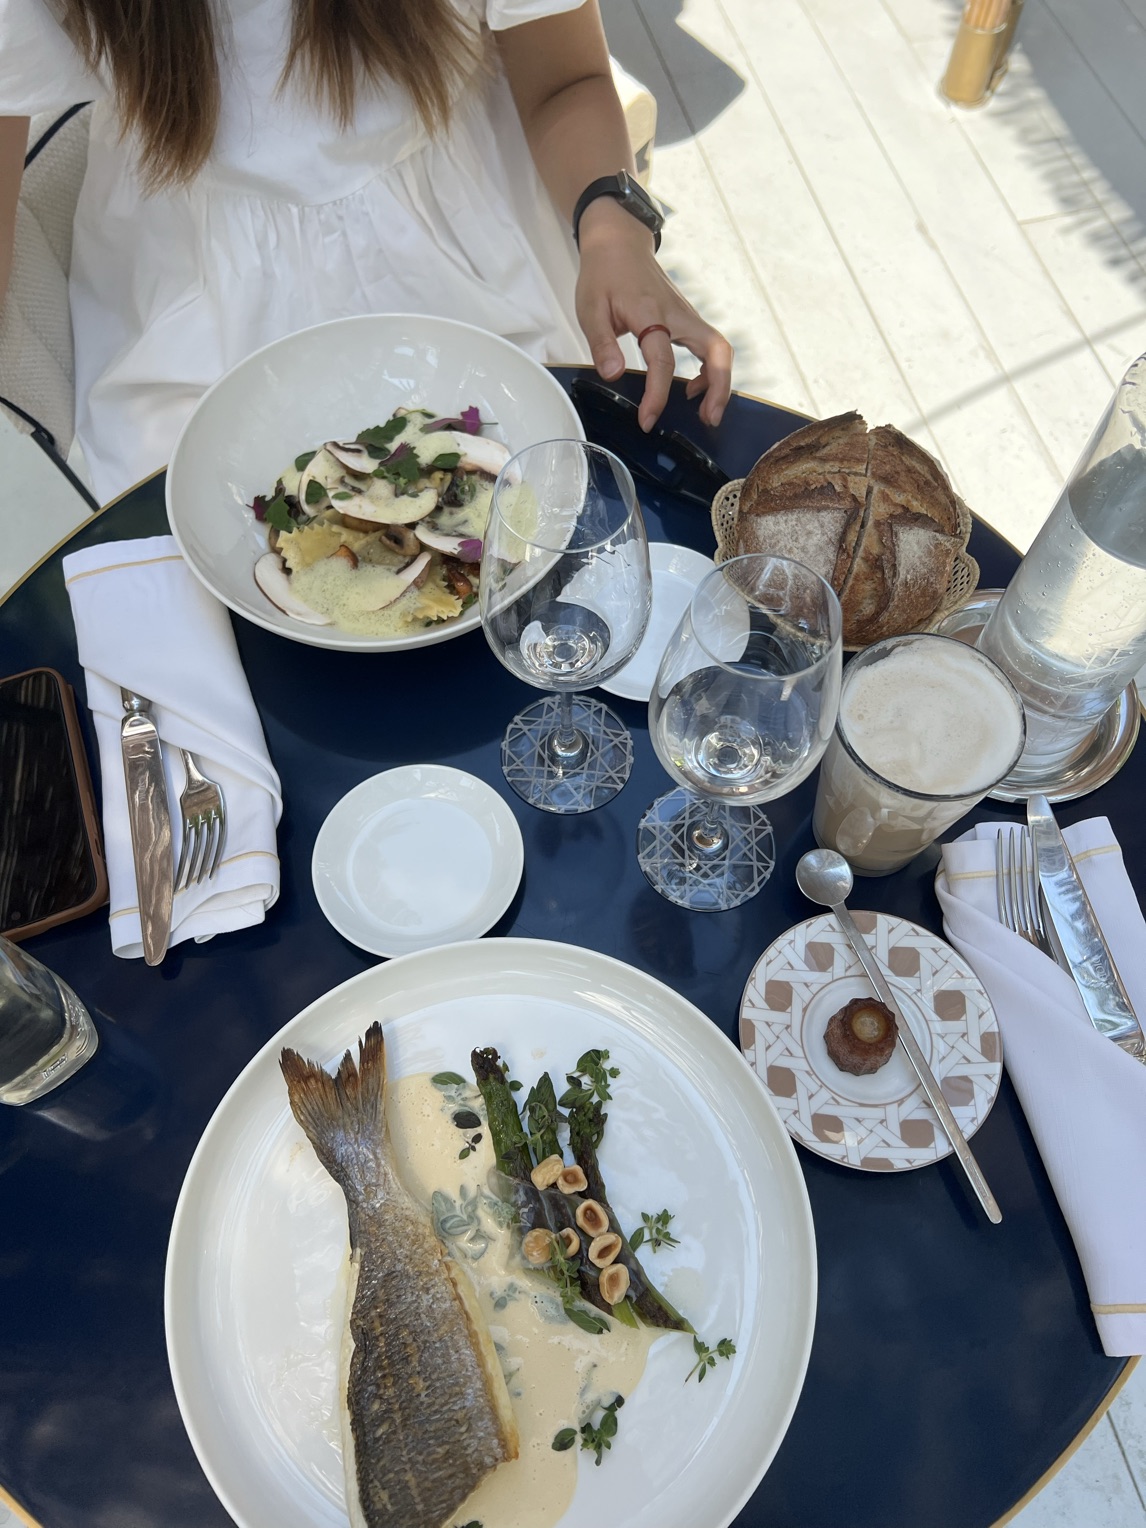 Feeling Like A Queen at the Dior Cafe in Saint Tropez France – Go